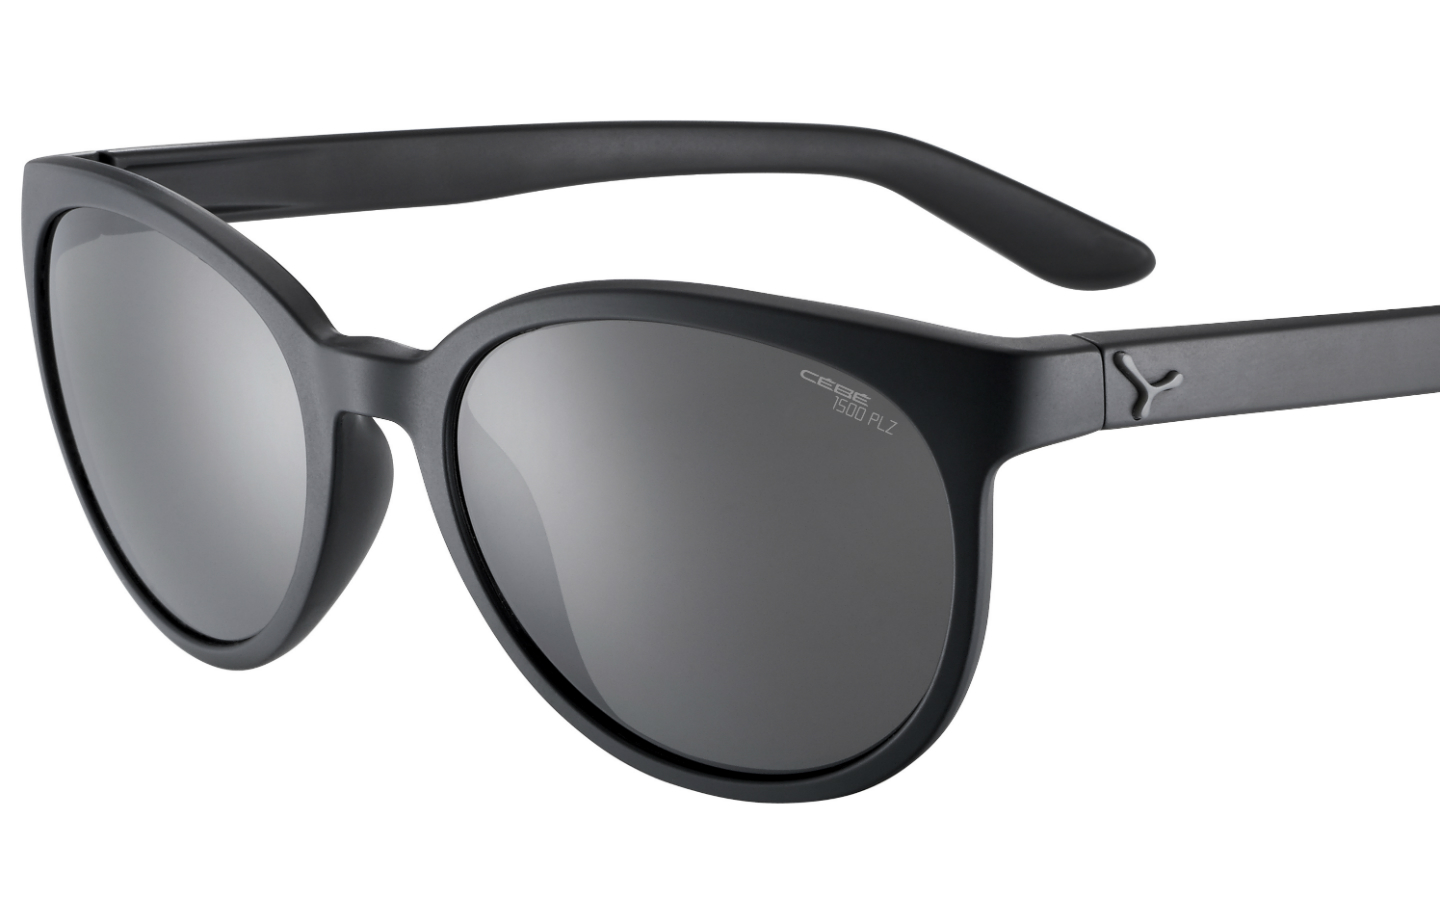 Buying guide: the best sunglasses drivers reviewed and rated (UPDATED)